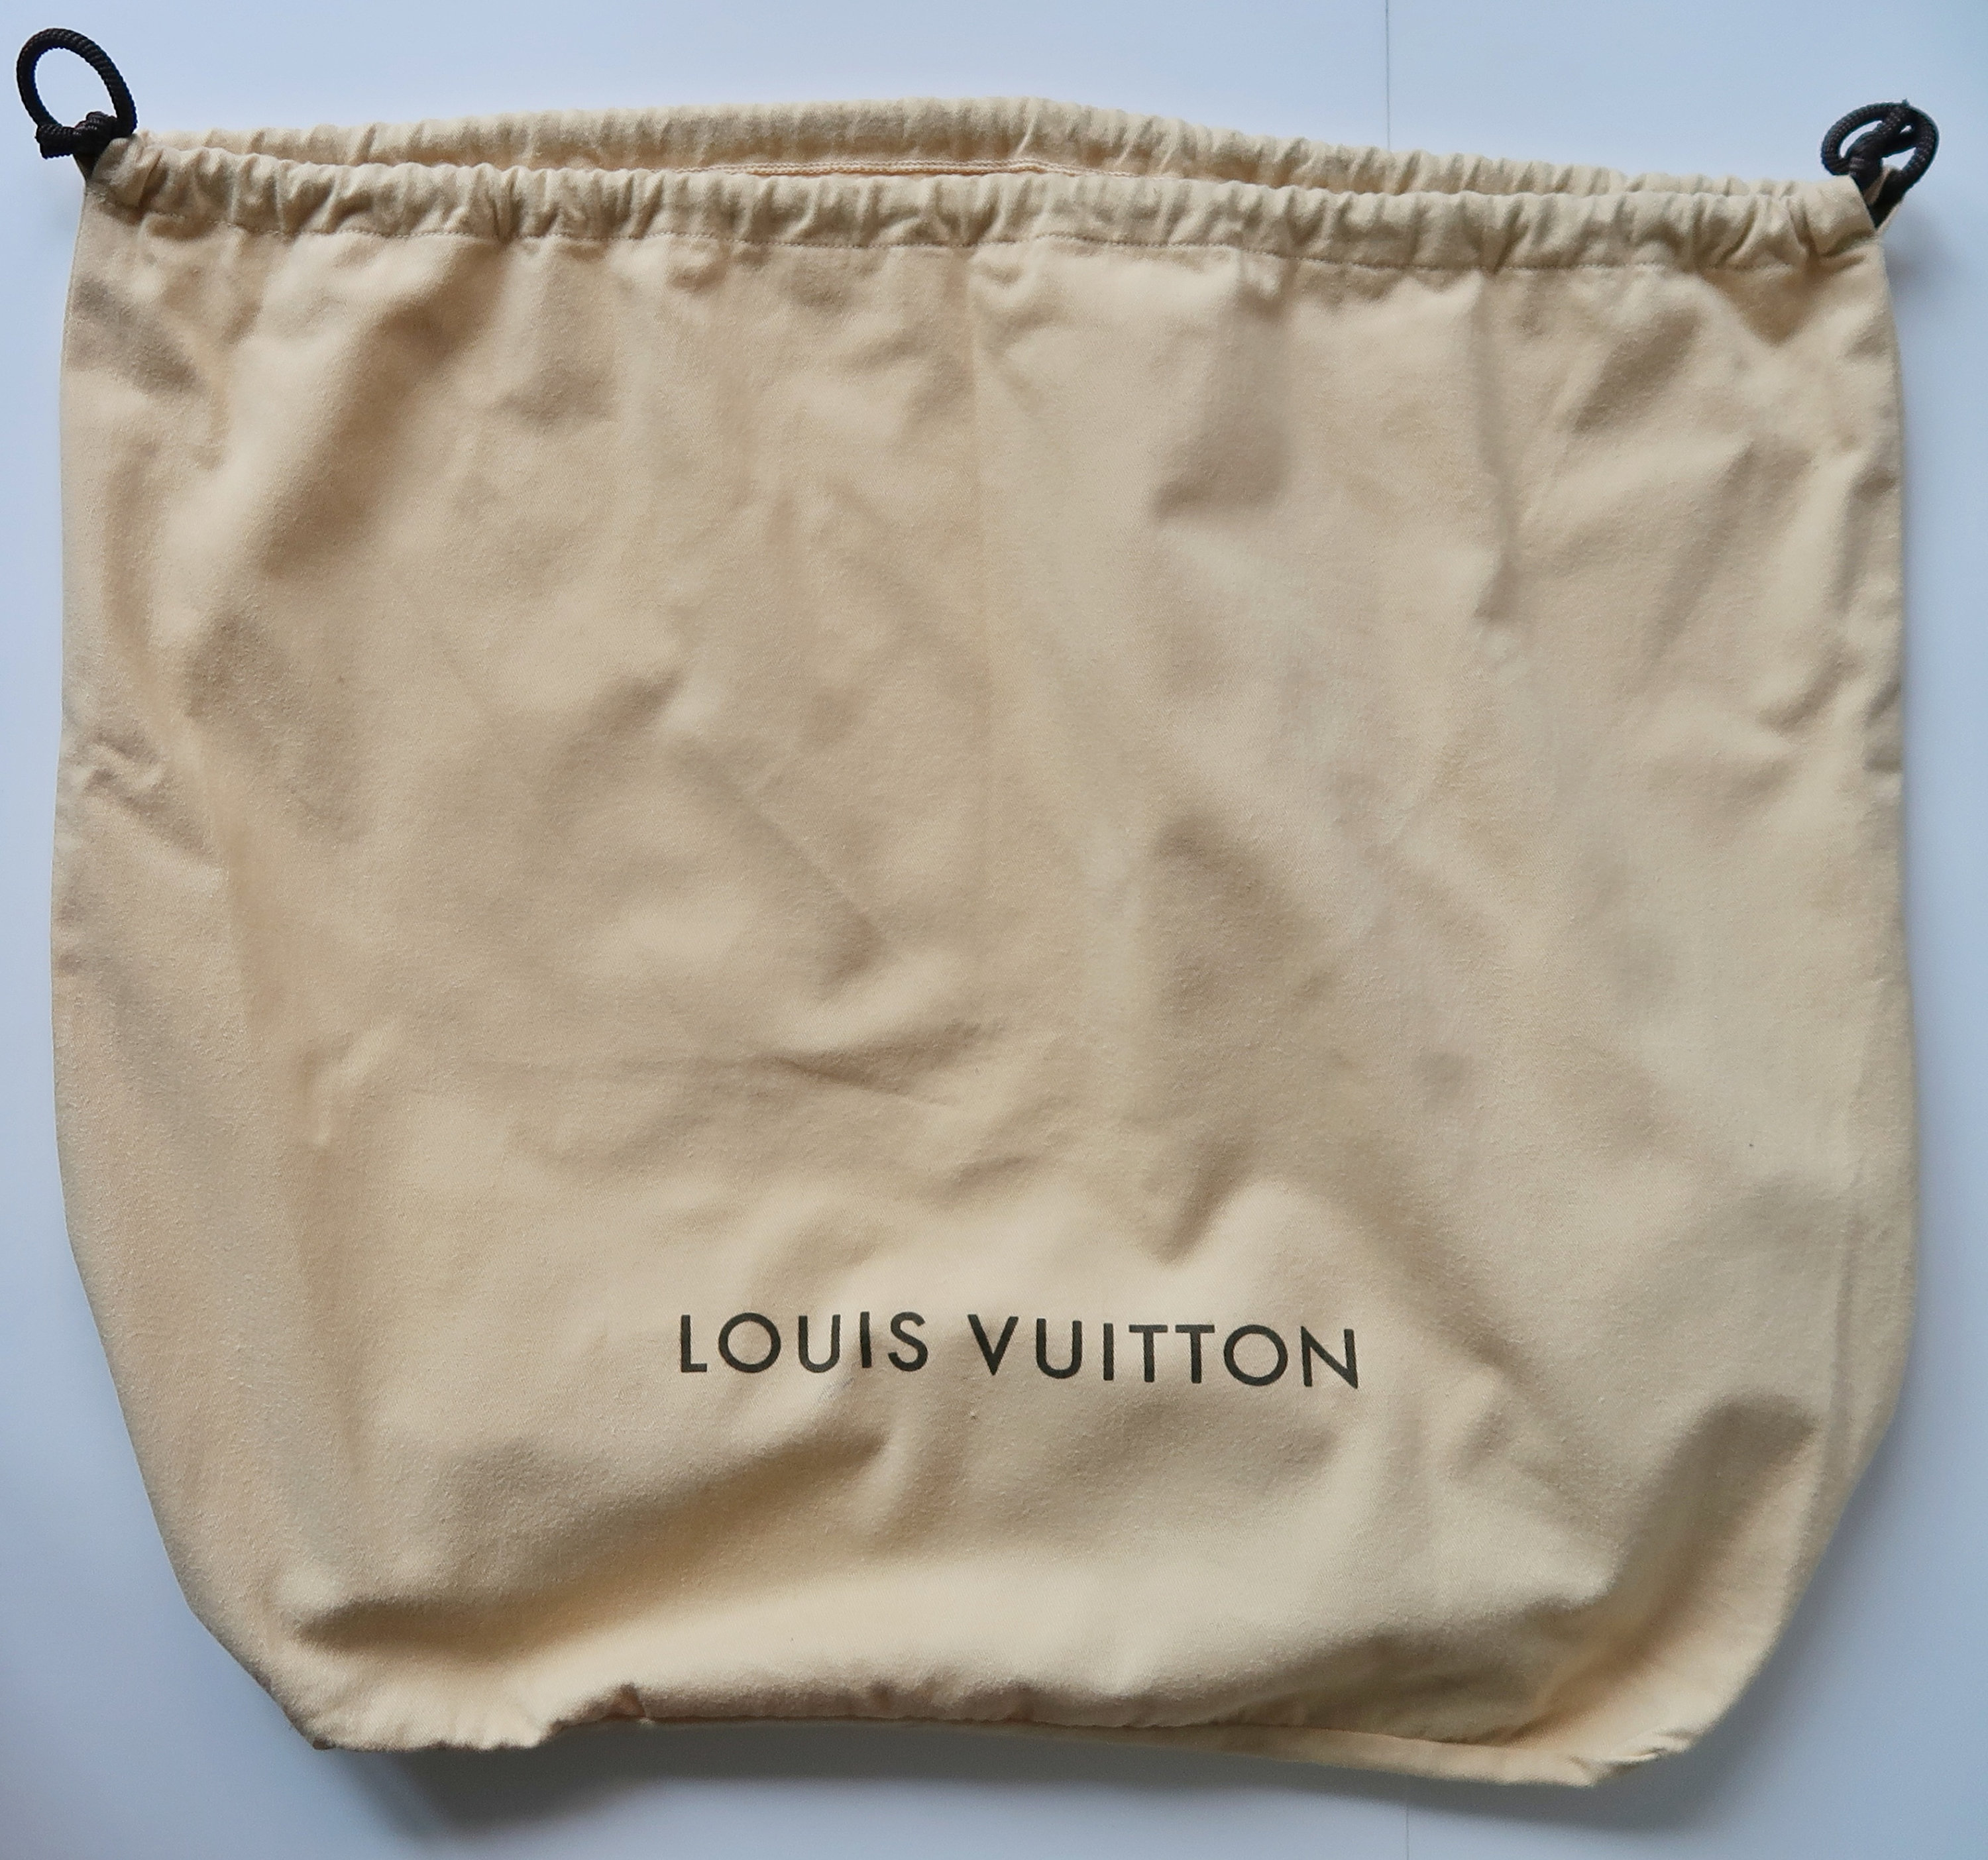 Louis Vuitton Dust Bag Flap Fold Over Envelope Style Storage Cover Yellow  Gold